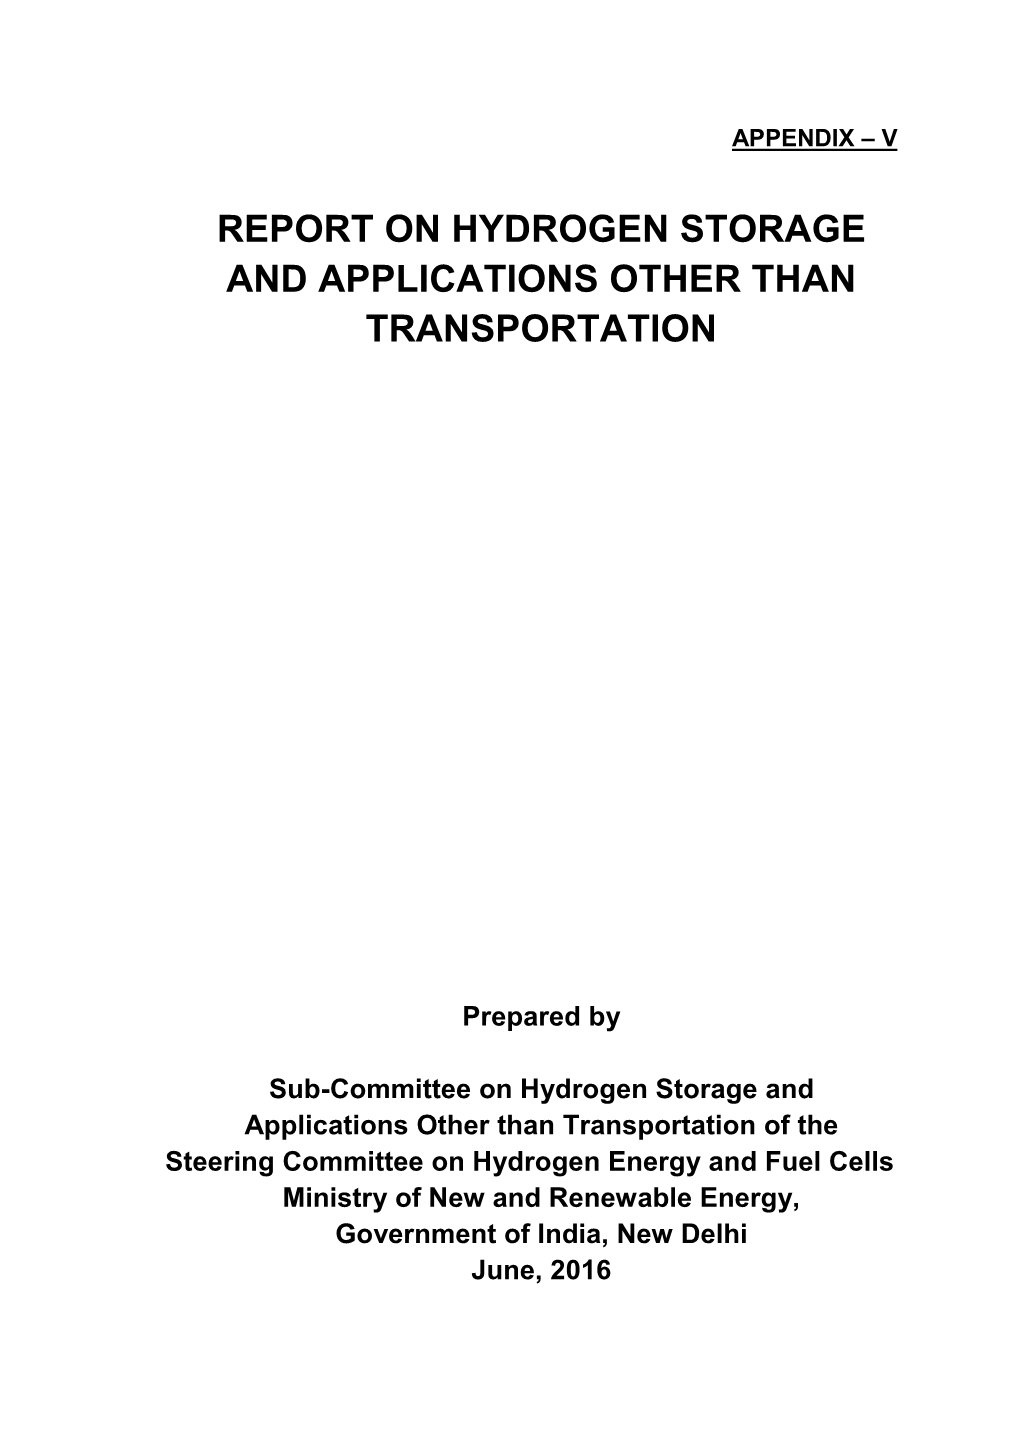 Report on Hydrogen Storage and Applications Other Than Transportation